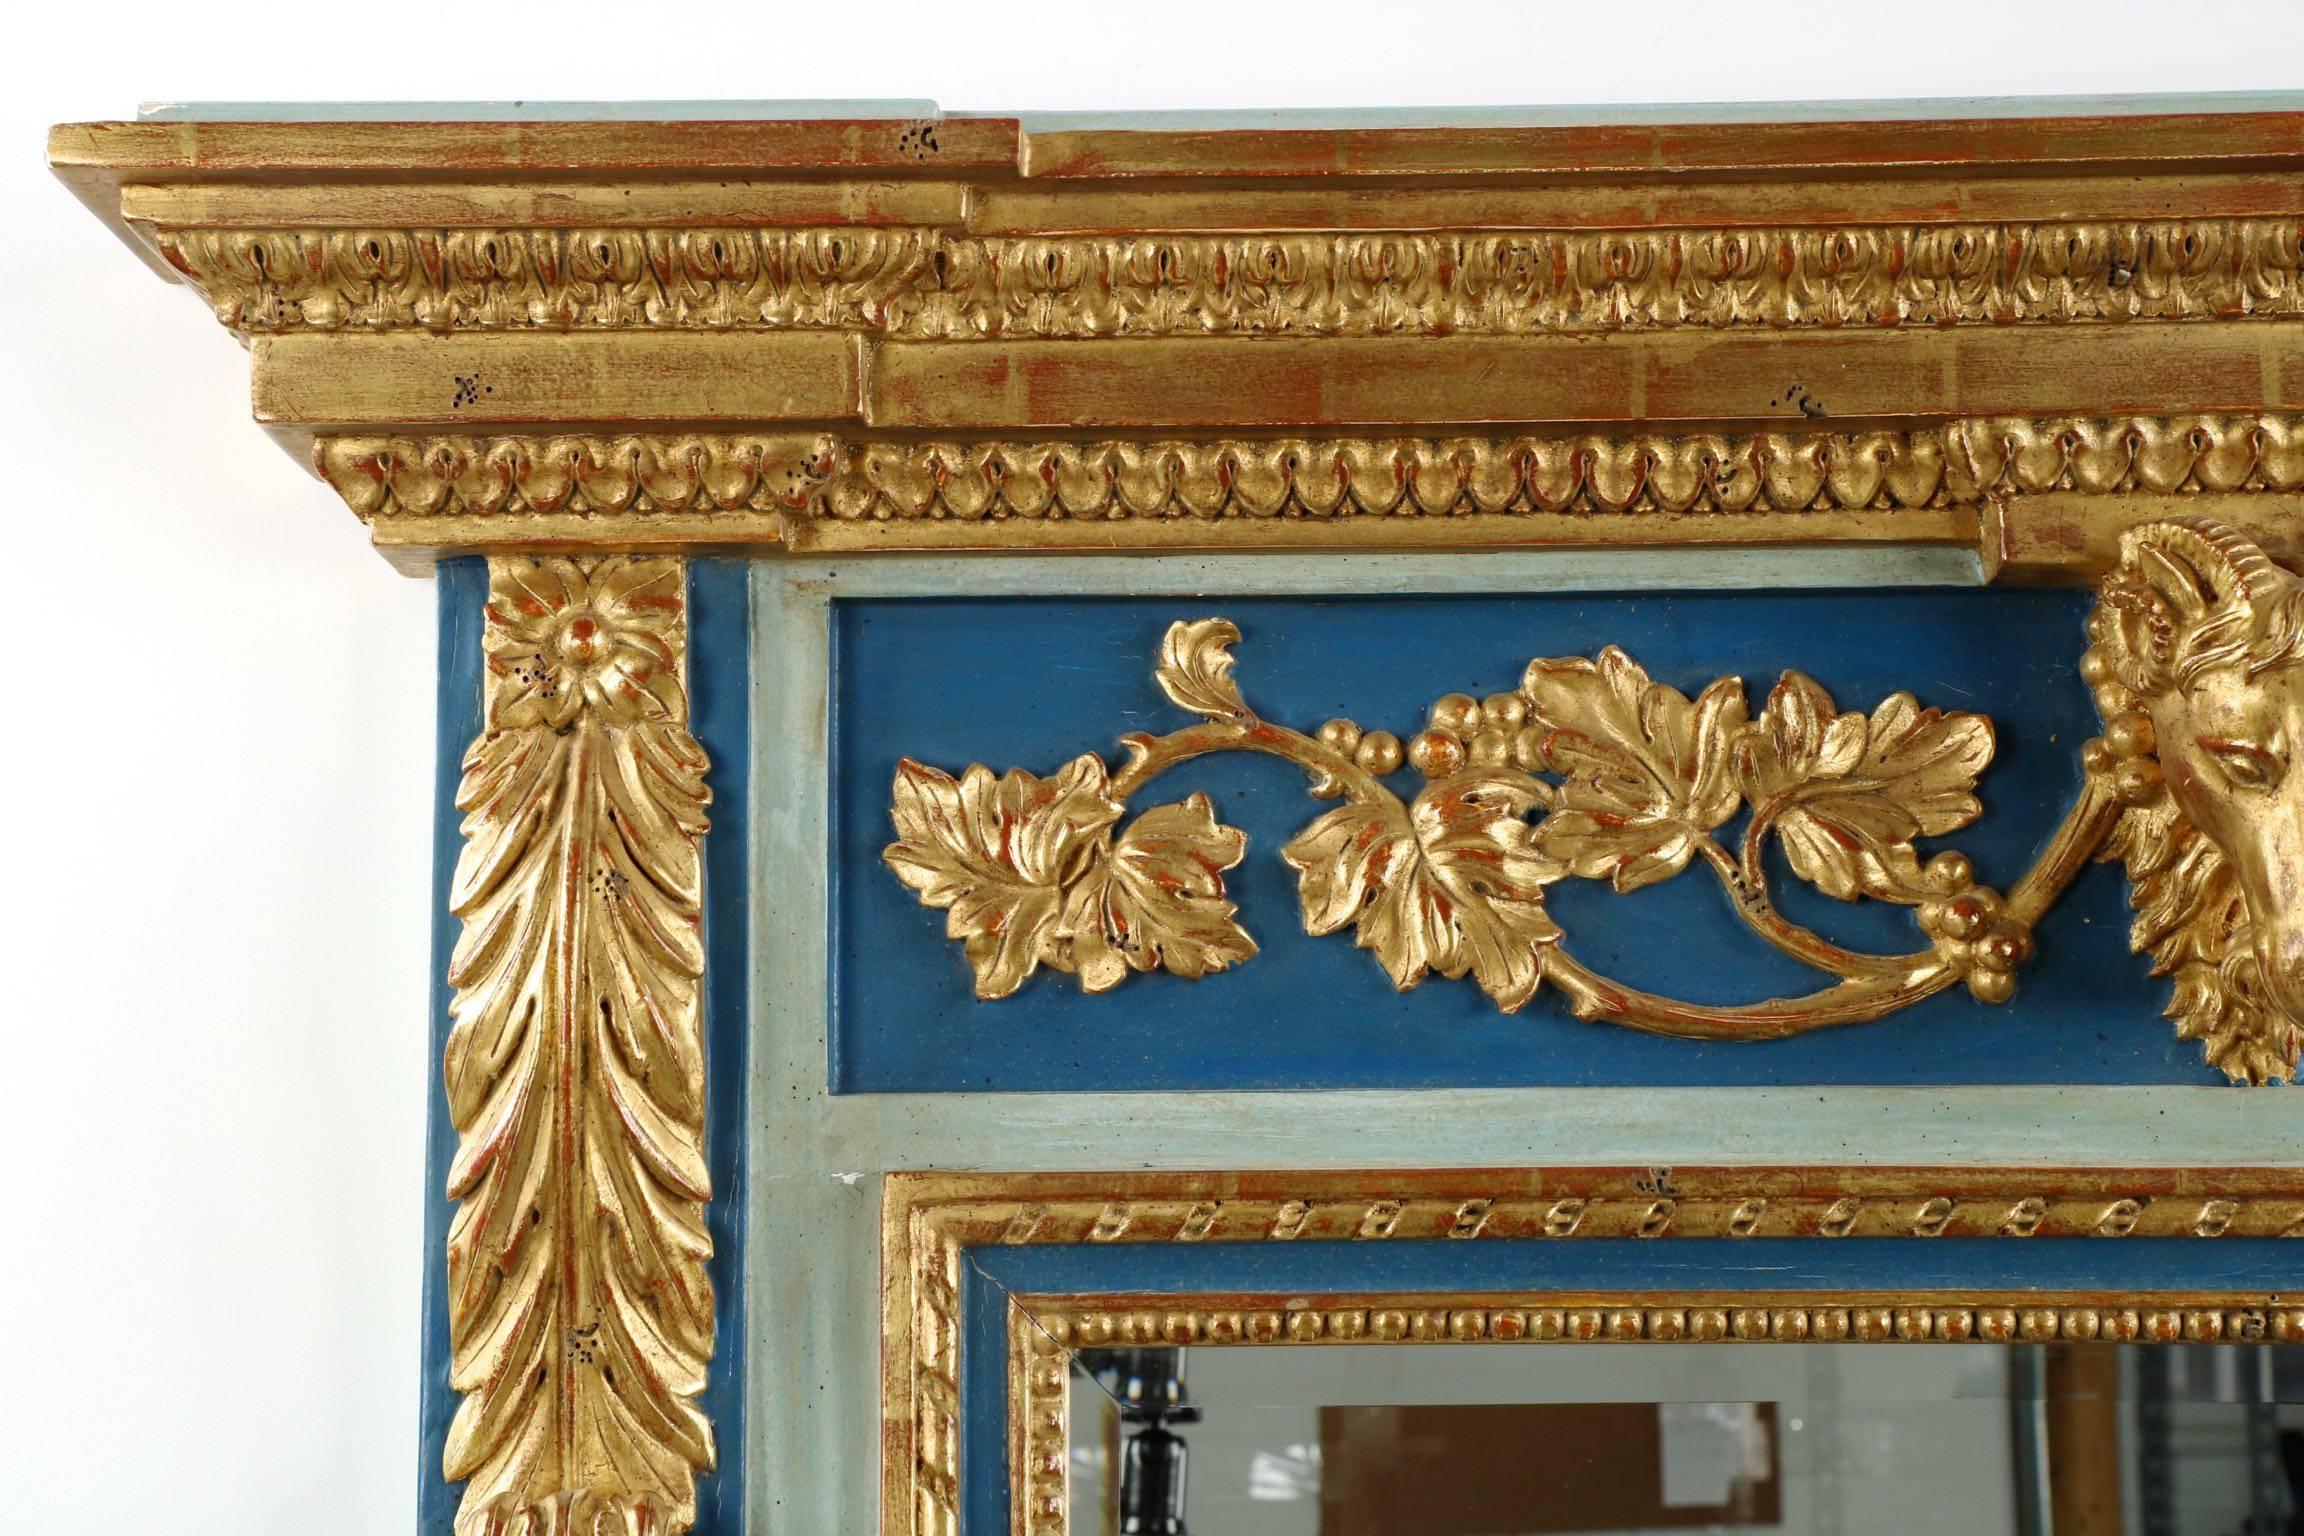 A substantial and impressive piece, this very fine French neoclassical trumeau mirror is in every way a statement piece. With panels of cobalt blue against an old worn teal within borders of gilded carvings, it is a mirror that brings an air of